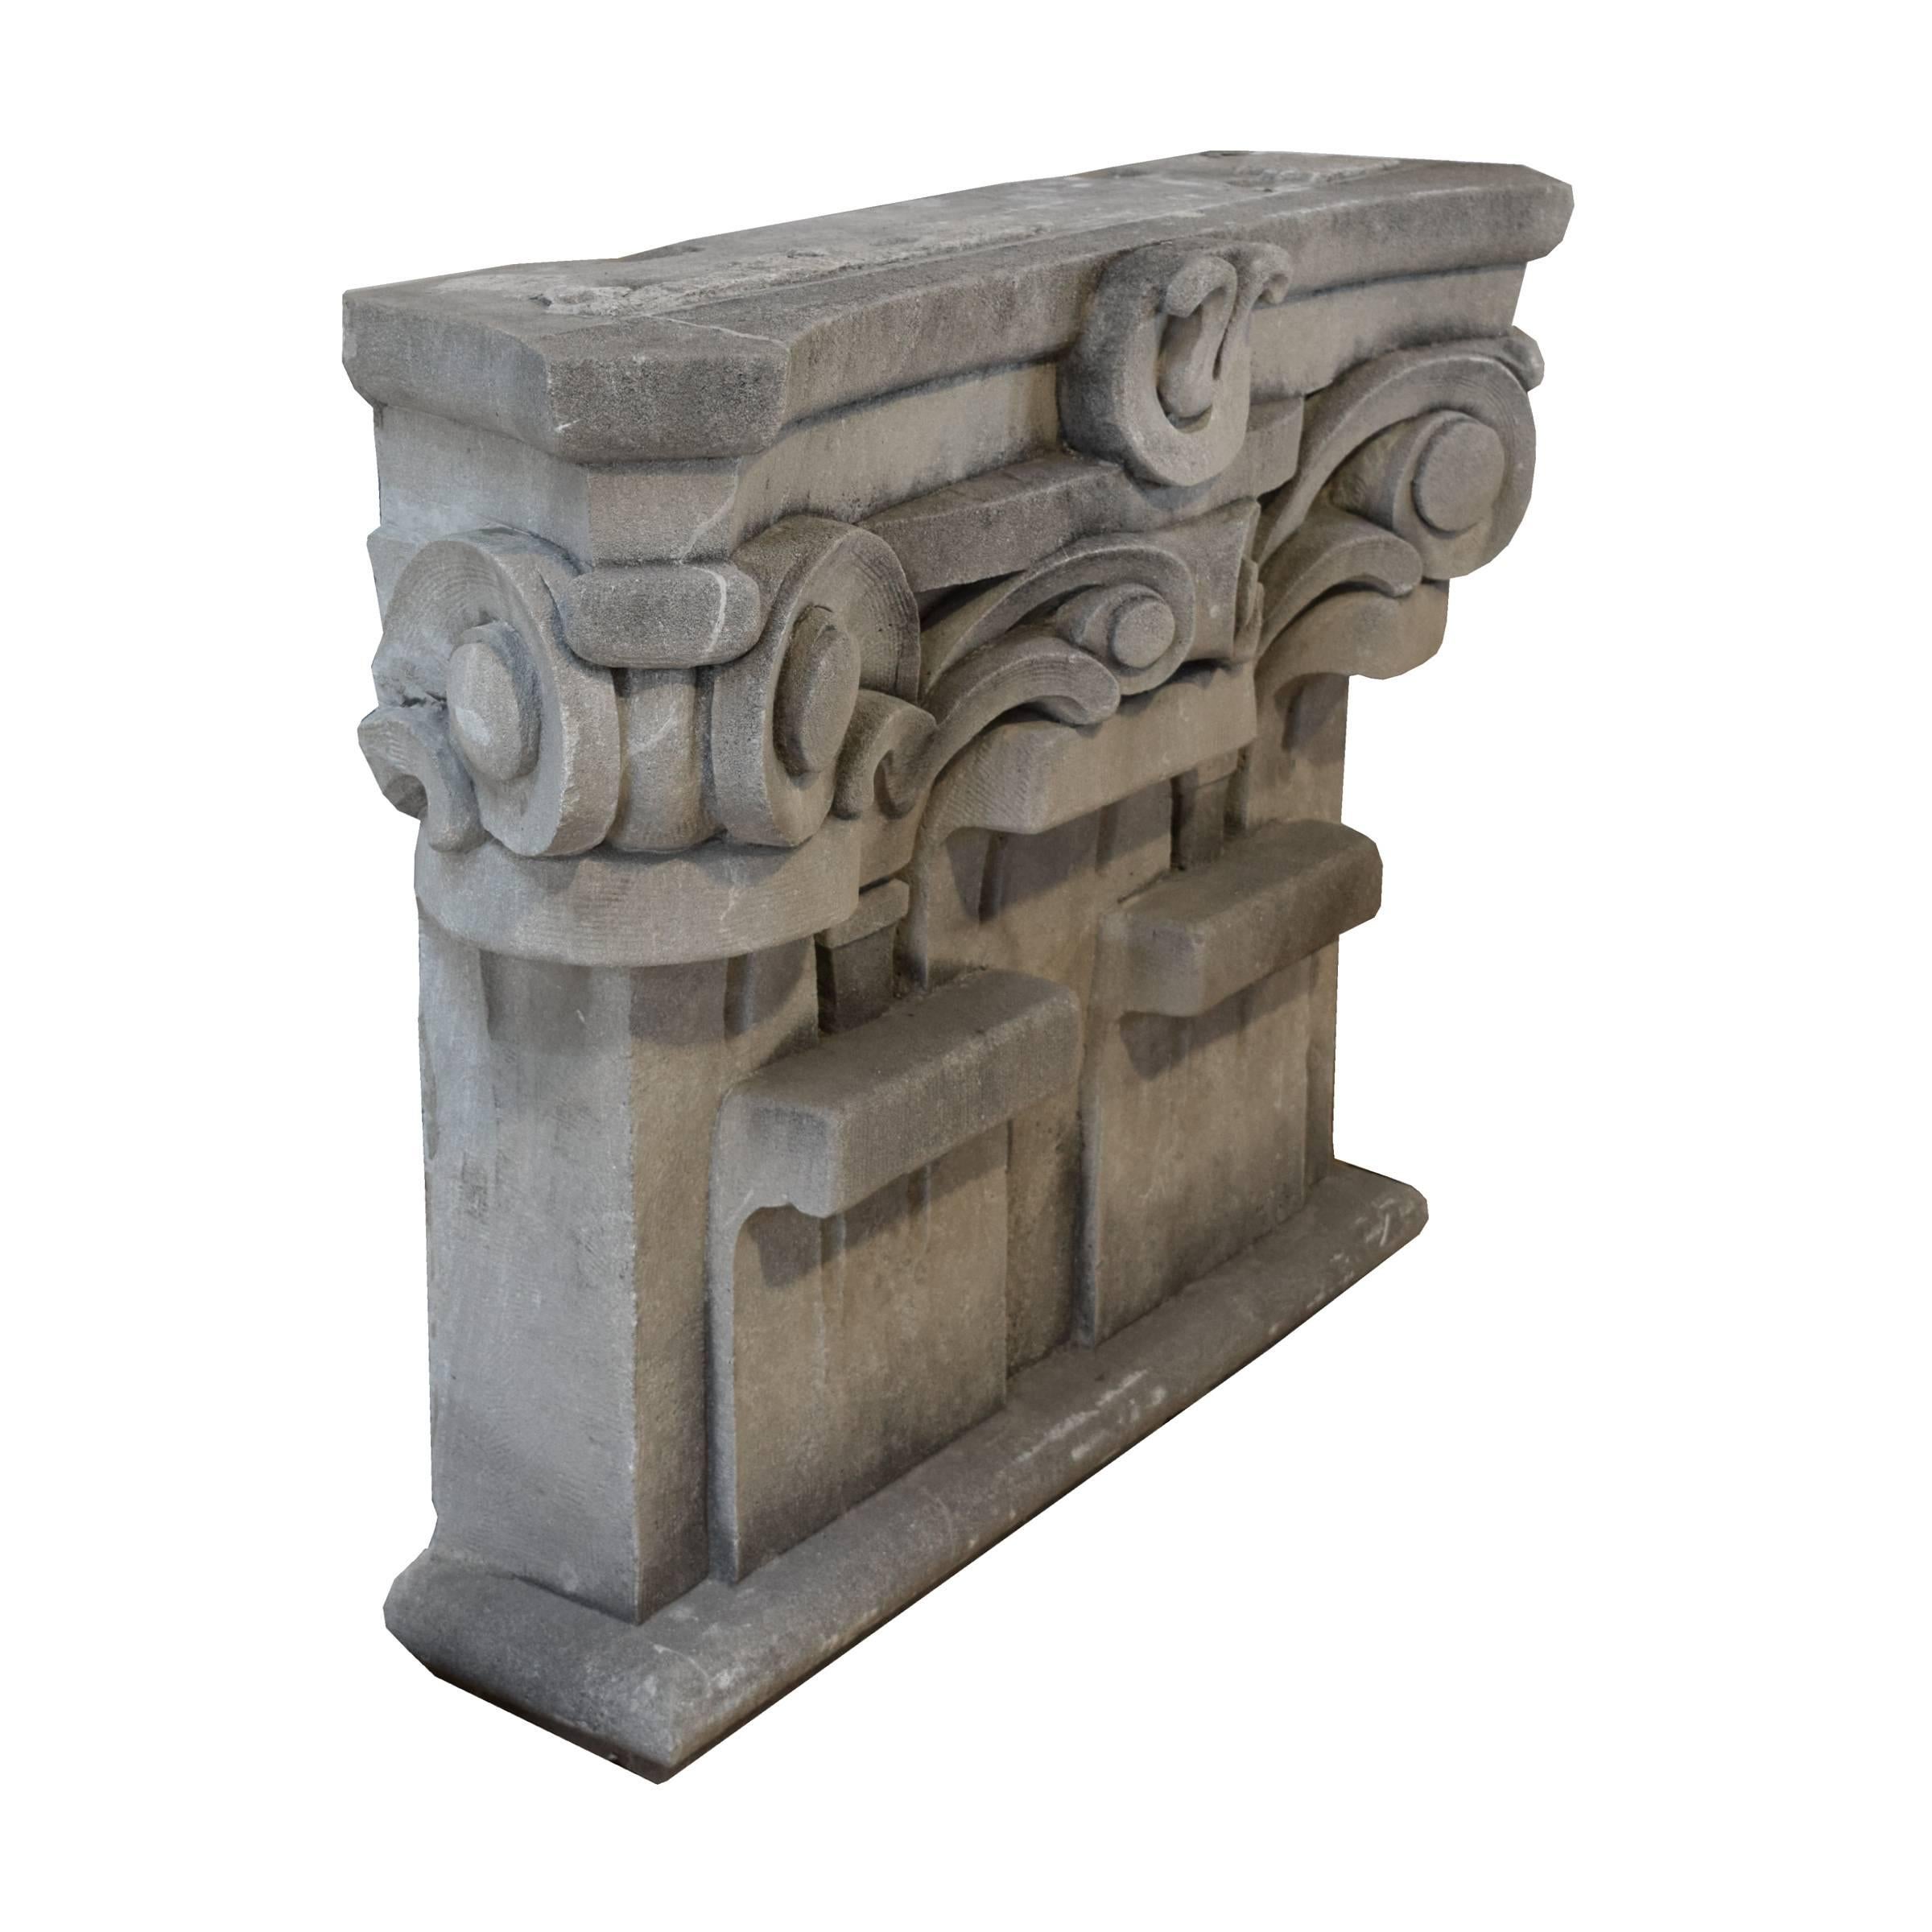 Carved limestone pilaster capital of a column from the original Chicago Mercantile Exchange building, 1927-2003 by Chicago architect Alfred Alschuler. Pair available.